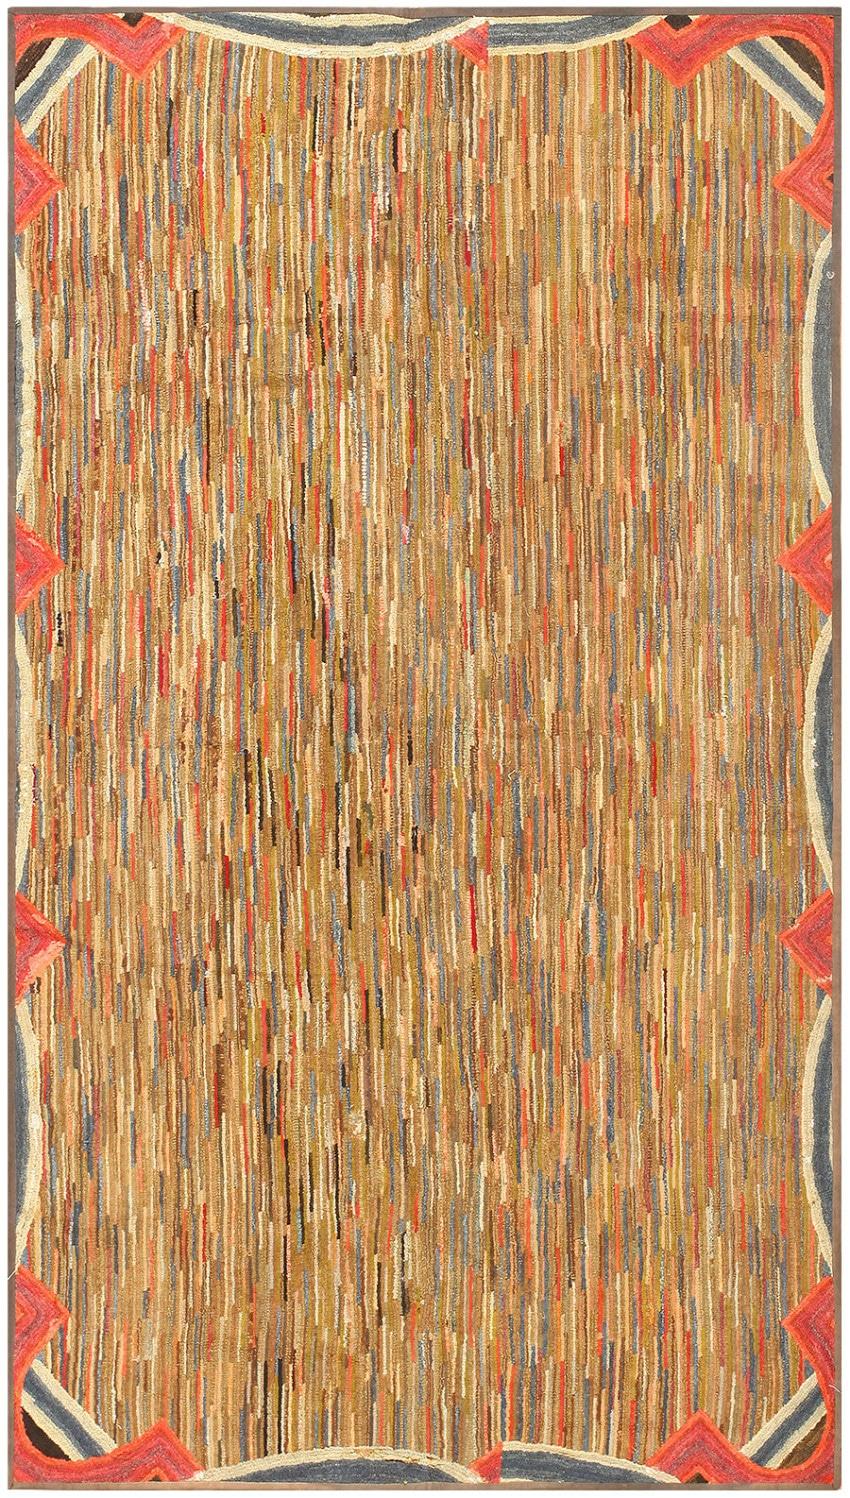 A Small Size American Antique Hooked Area Rug, Weaving Origin: United States, Rug Date: 1920’s